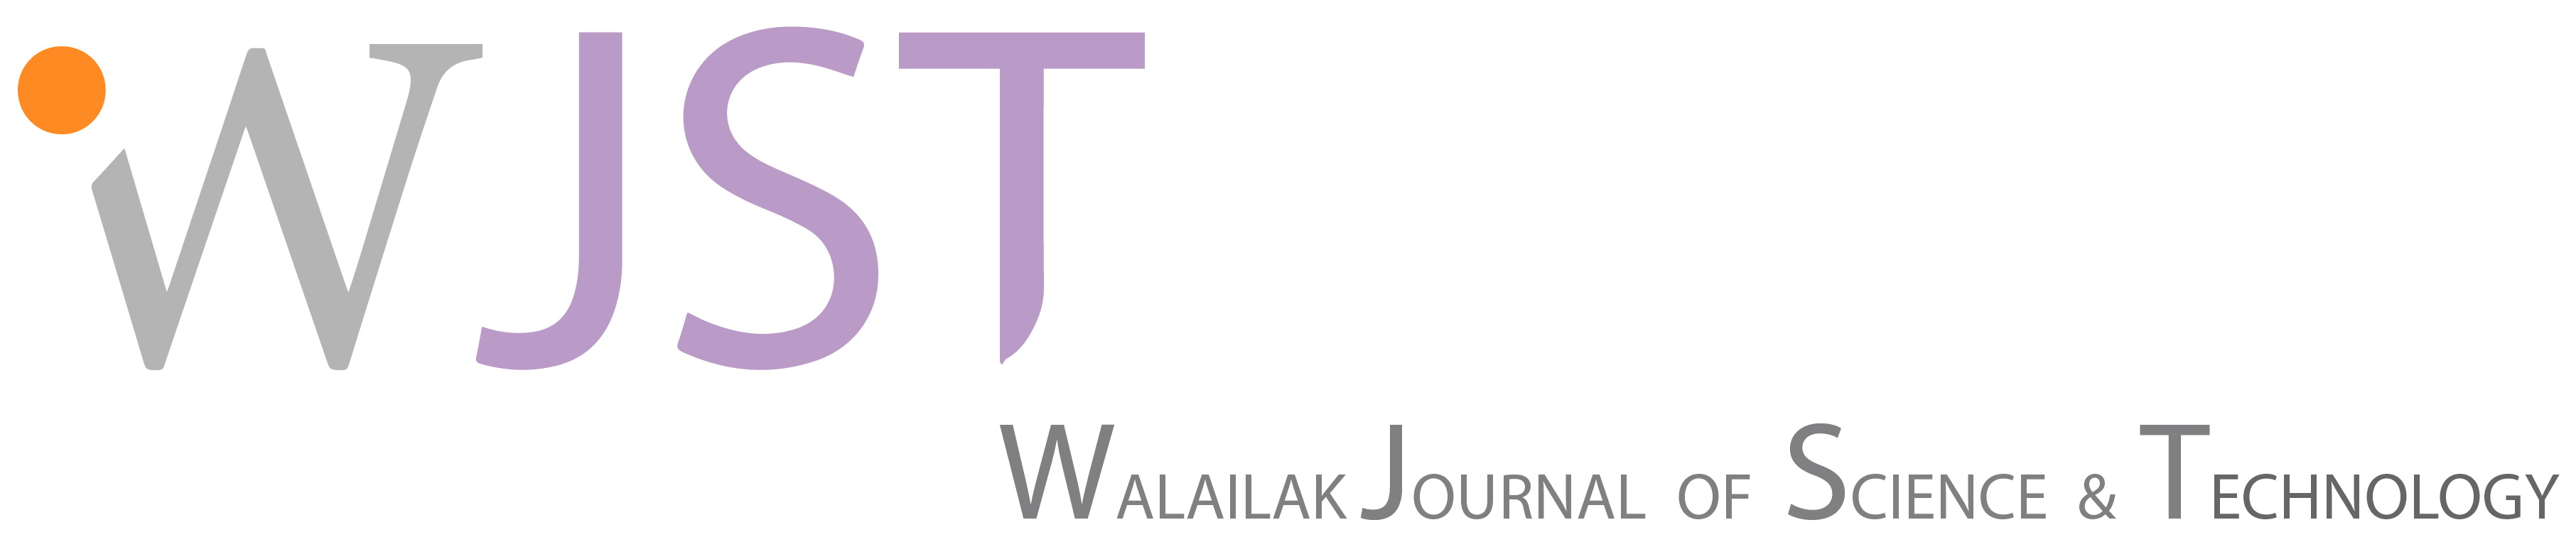 Walailak Journal of Science and Technology (WJST)